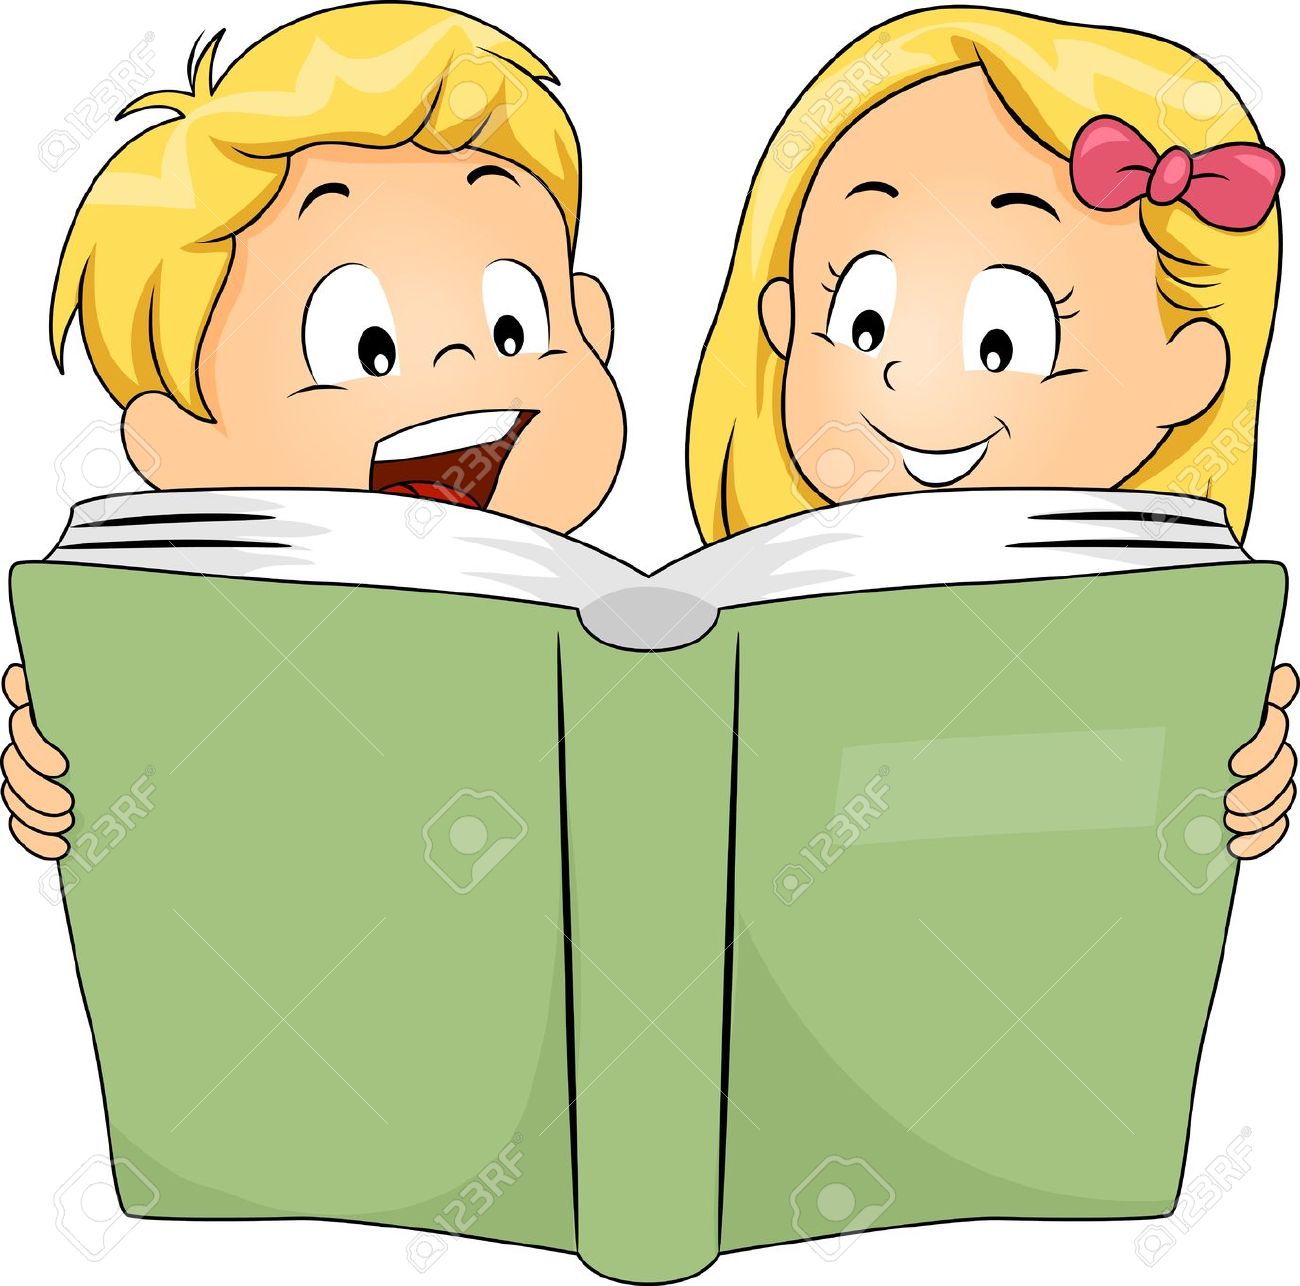 Sharing Books Clipart.